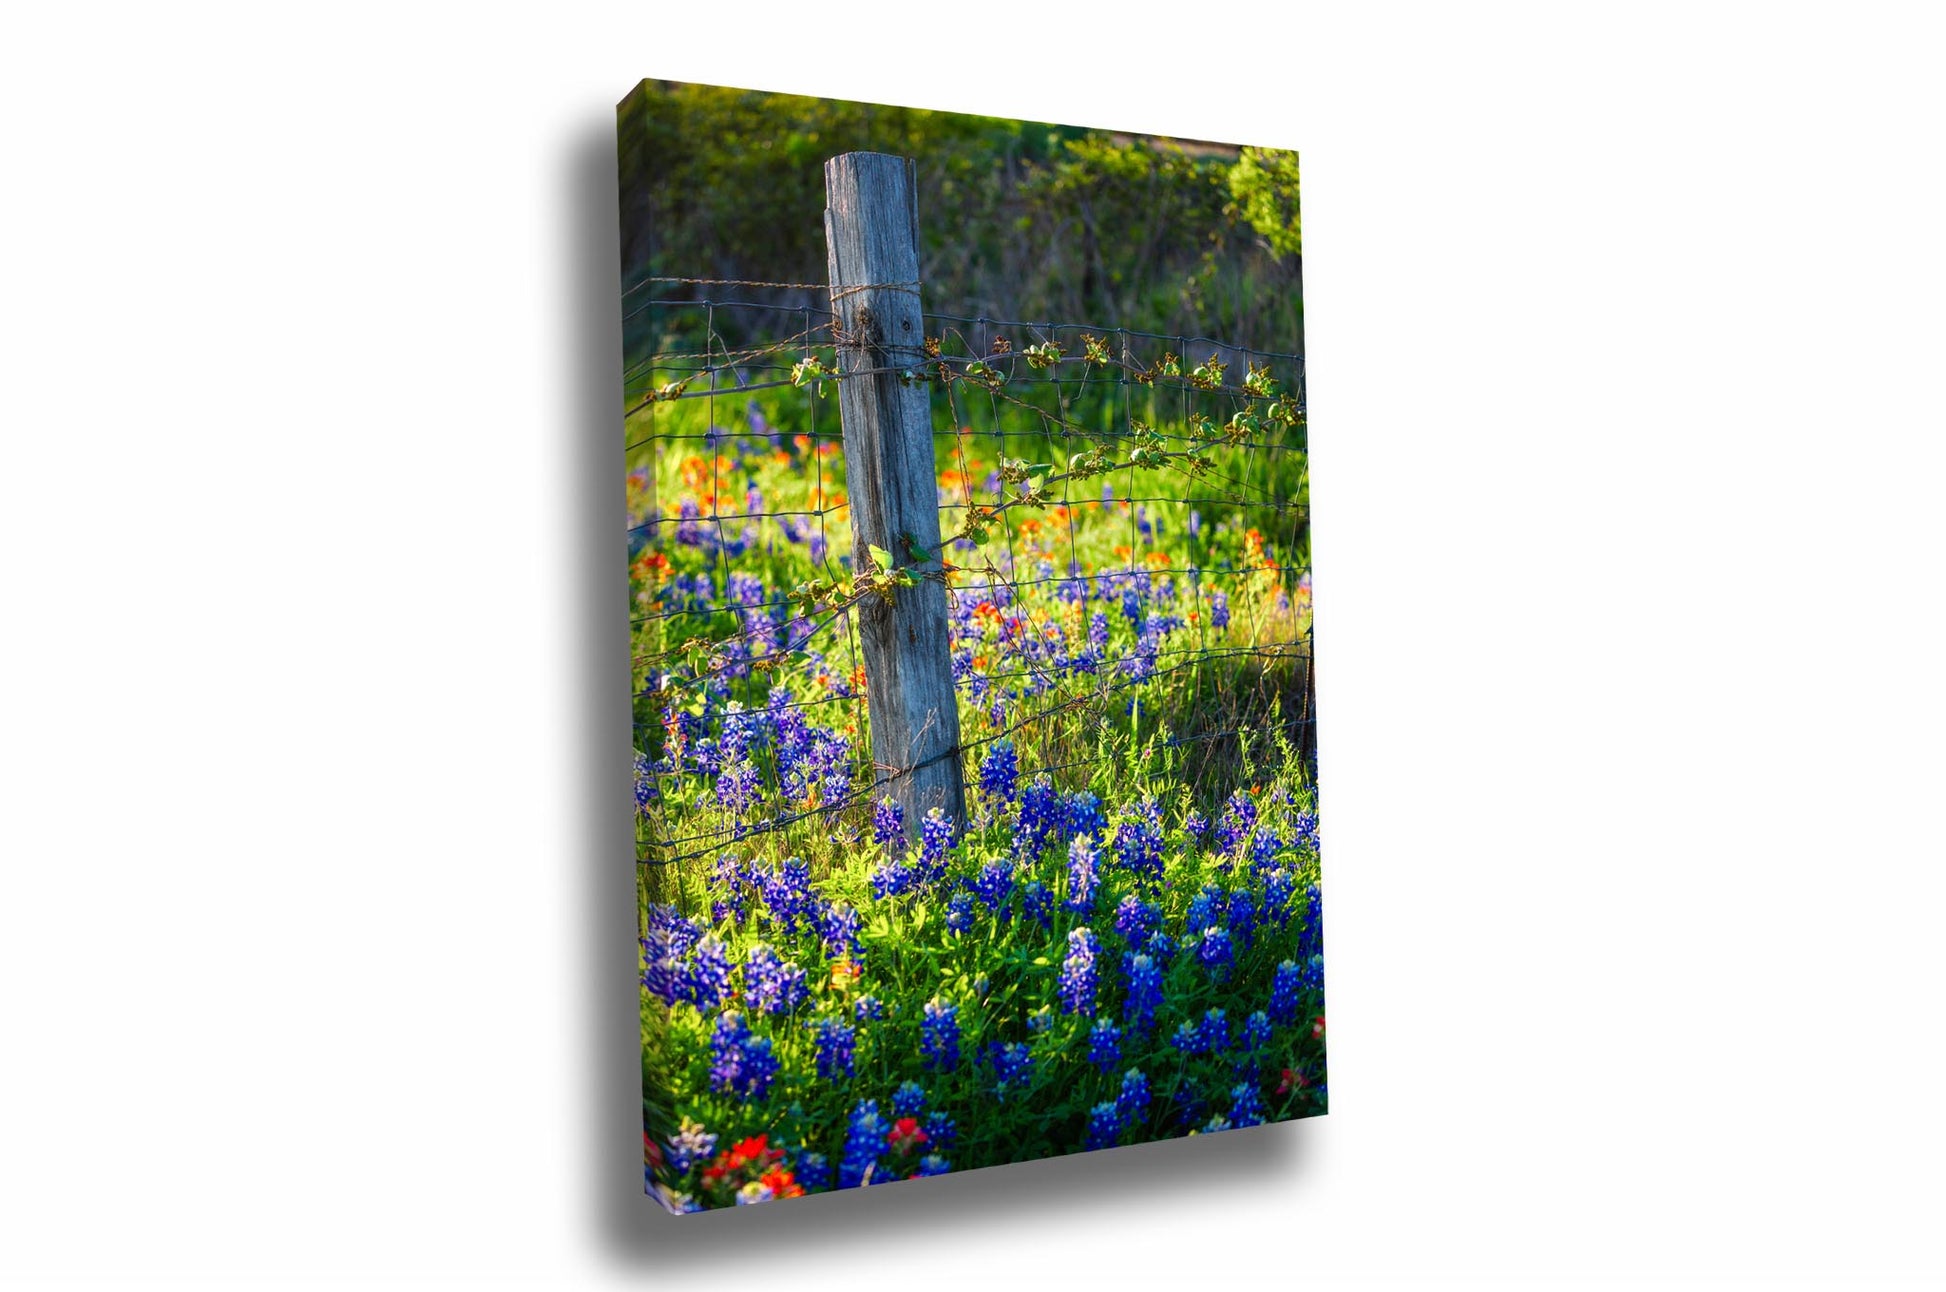 Vertical farmhouse canvas wall art of a fence post surrounded by bluebonnets on a spring day in rural Texas by Sean Ramsey of Southern Plains Photography.